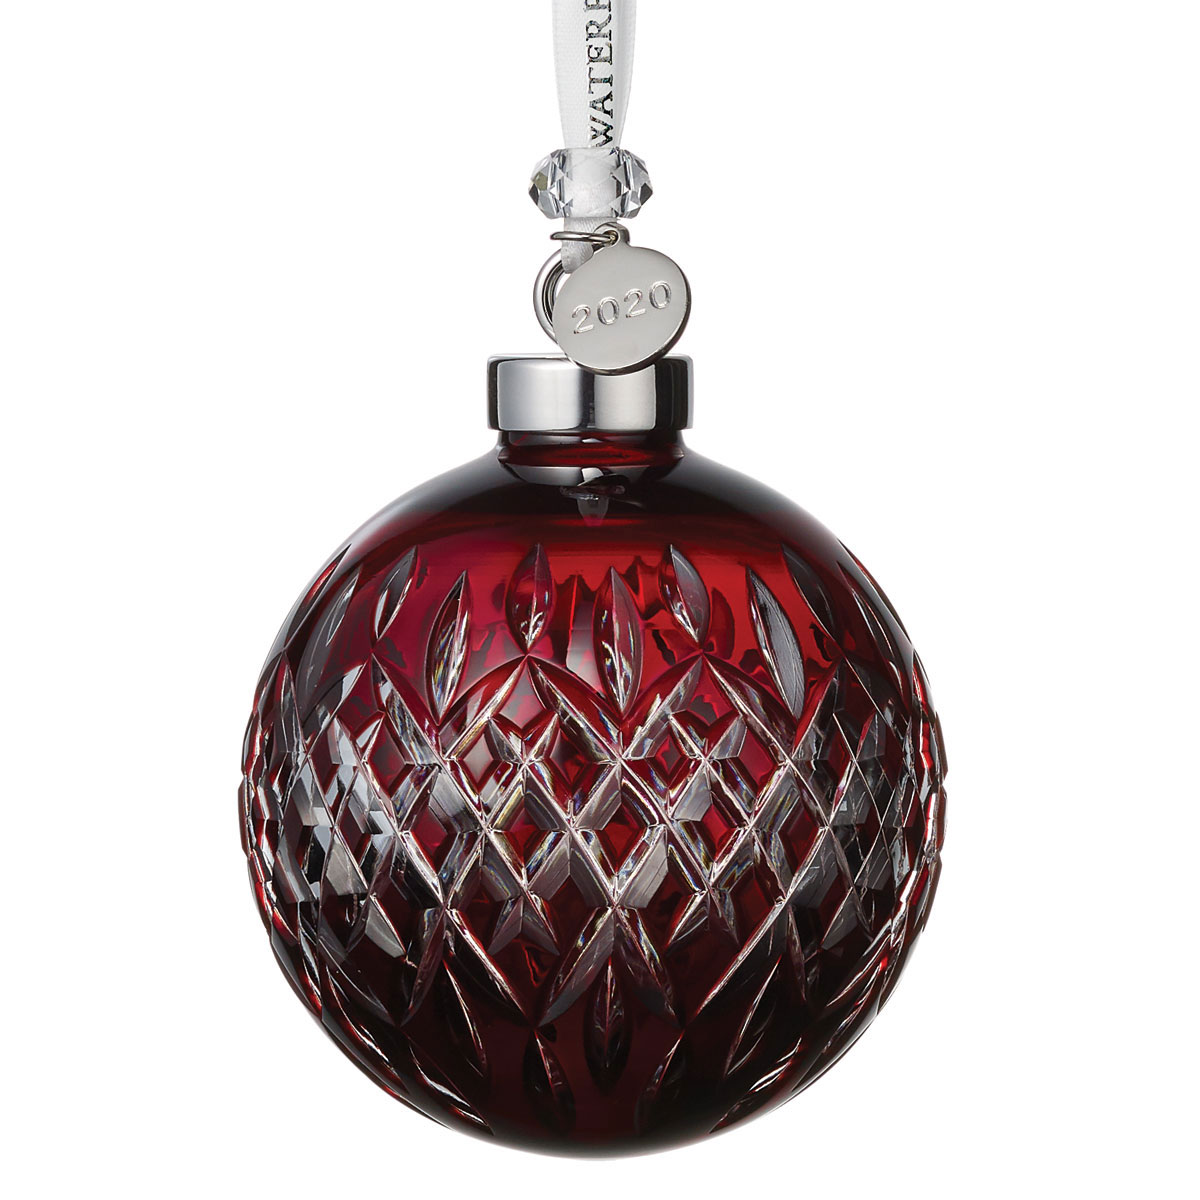 Waterford Crystal 2020 Ruby Red Ball Christmas Ornament